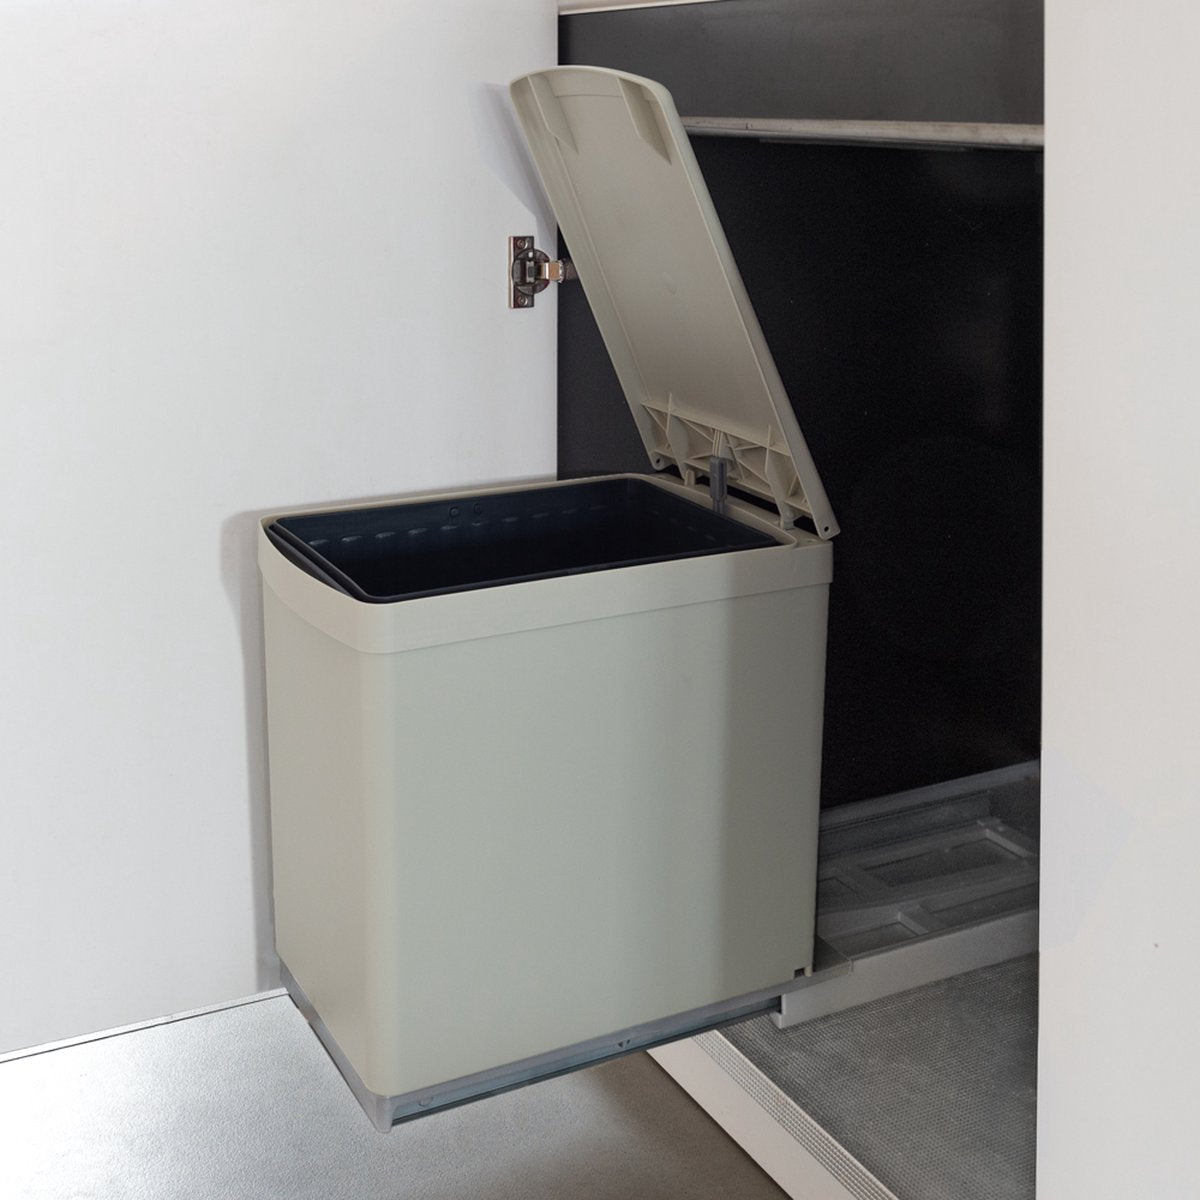 Built-in waste bin 16 liter automatic lid opening Gray